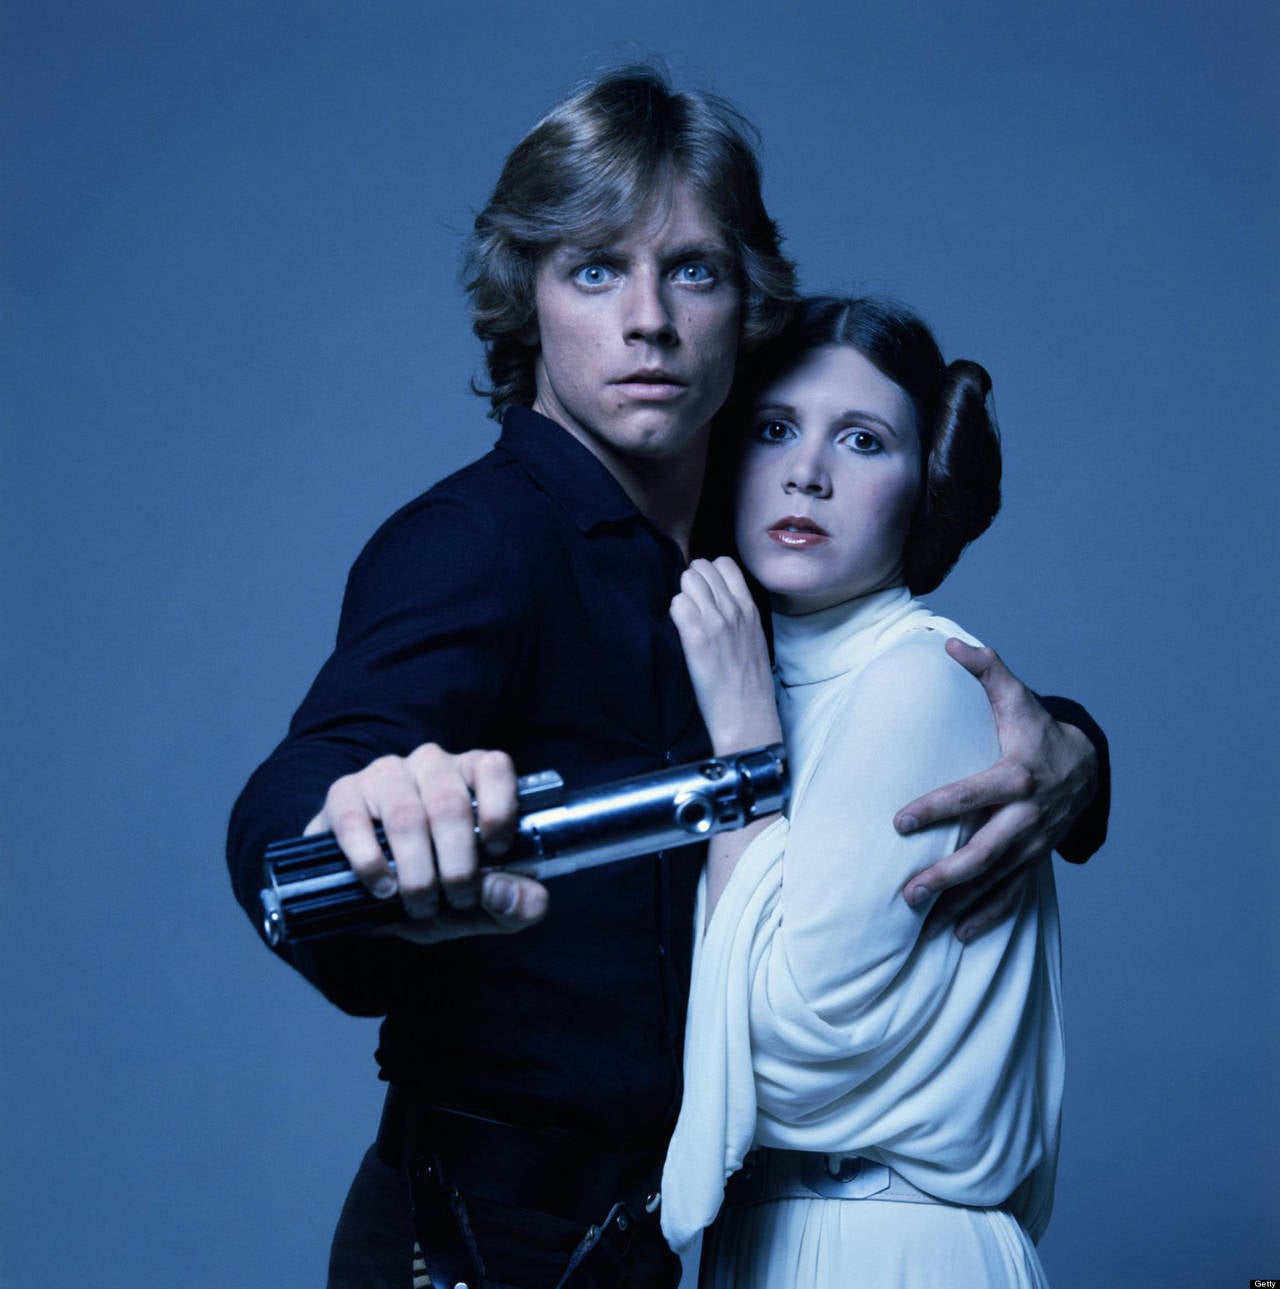 Luke and Leia (Mark Hamill and Carrie Fisher), Star Wars, 1977
Chromogenic print
30 x 30 inches
estate edition of 50

American actors Mark Hamill and Carrie Fisher in costume as brother and sister Luke Skywalker and Princess Leia in George Lucas'